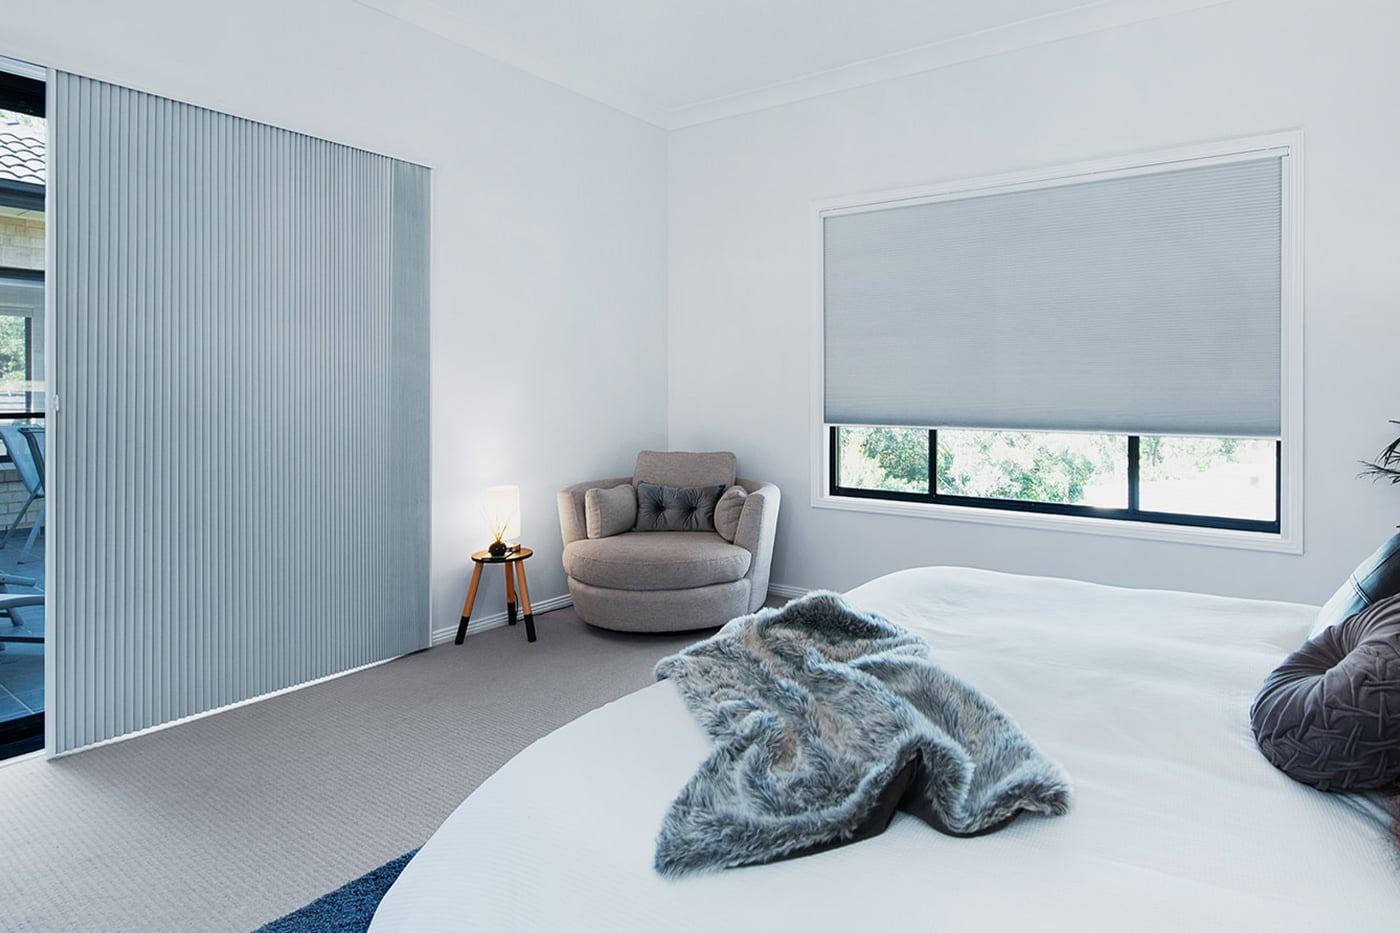 Motorised Portrait Honeycomb Shades by Norman covering windows in a white bedroom, available in various fabric design and opacity. Made in Australia.